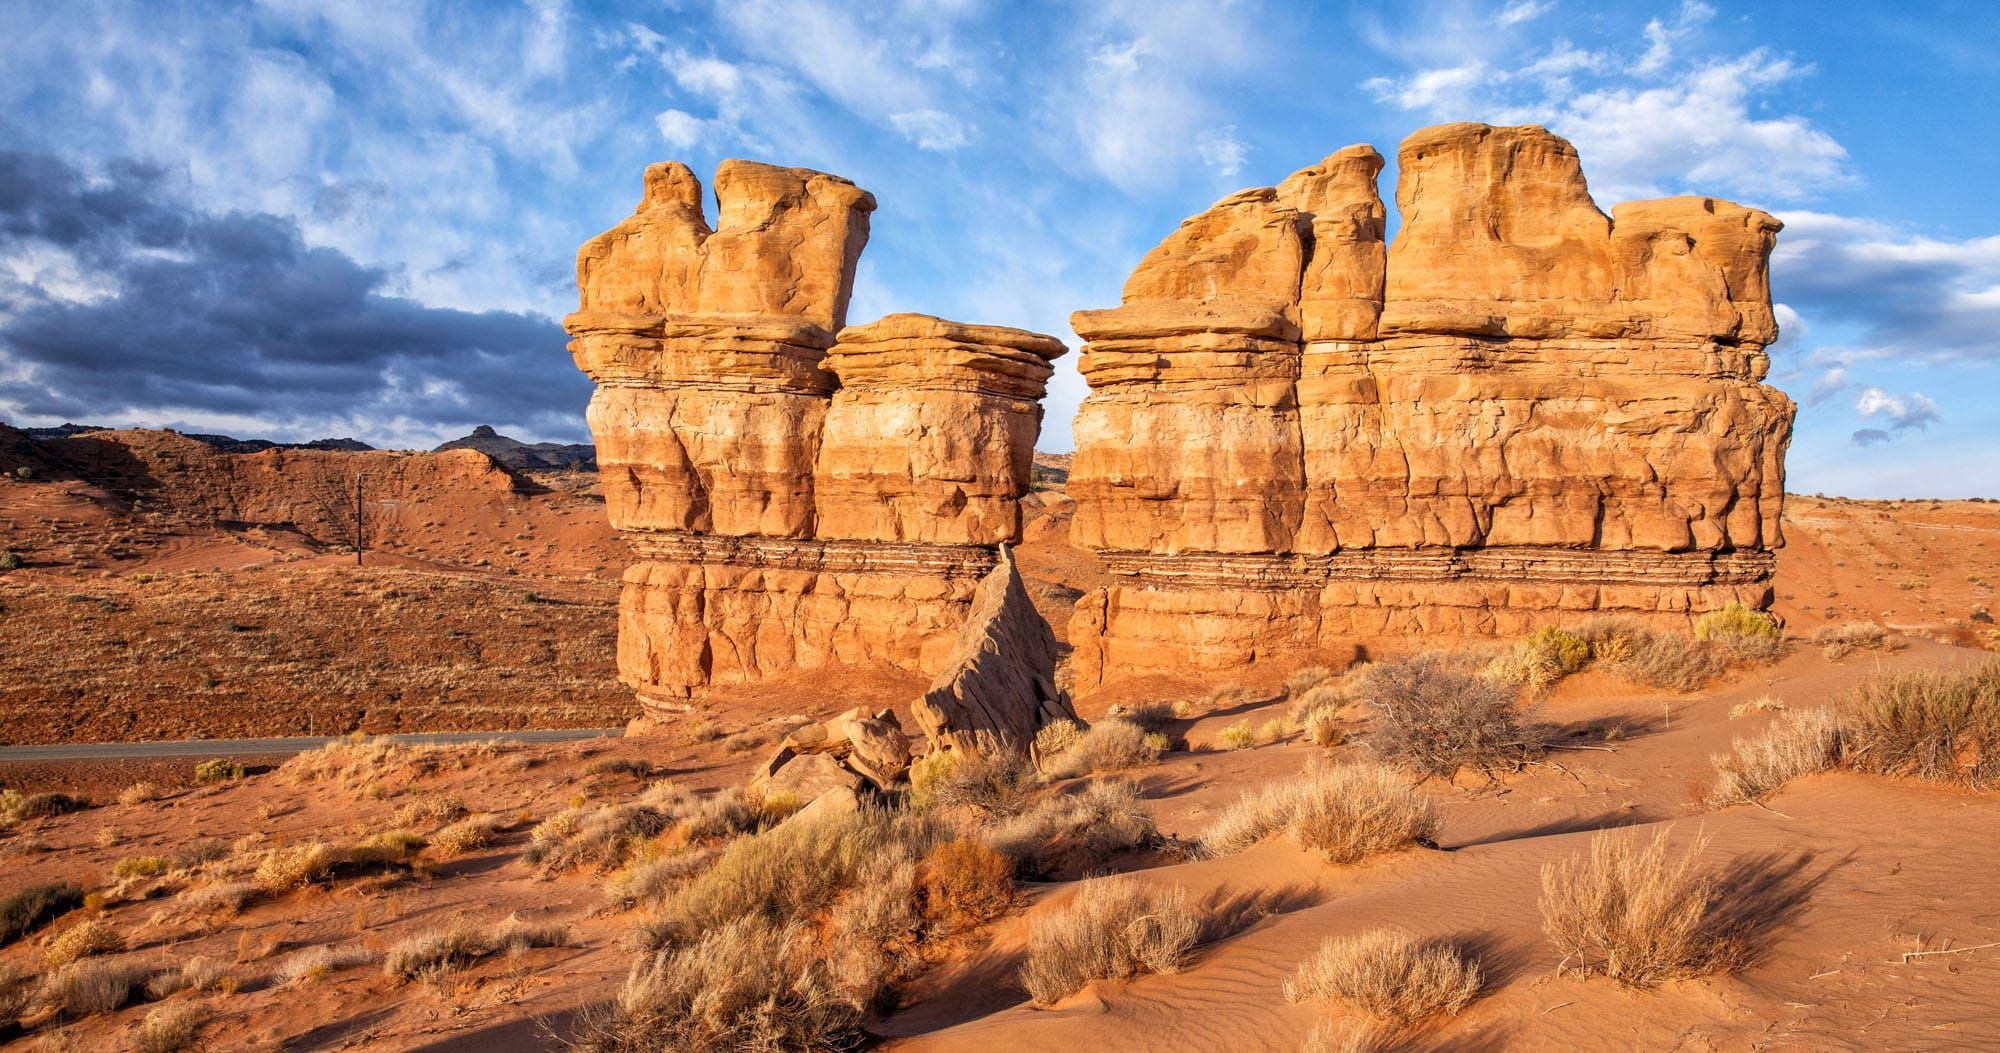 Featured image for “Best National Parks in the USA: 15 Amazing Parks for Your Bucket List”